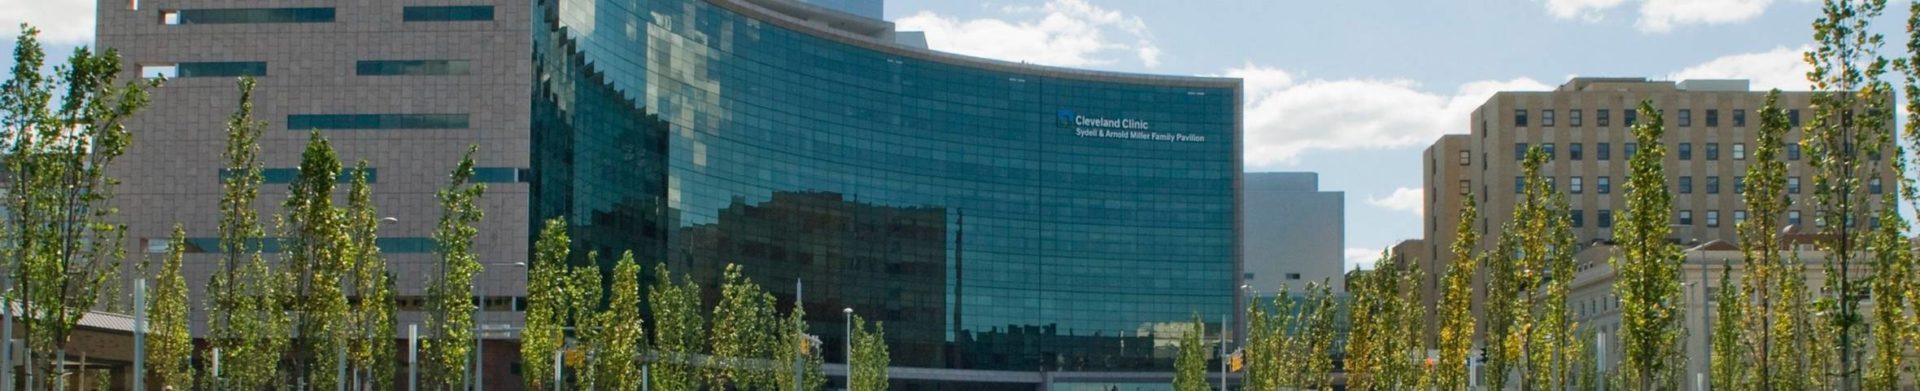 the Cleveland Clinic